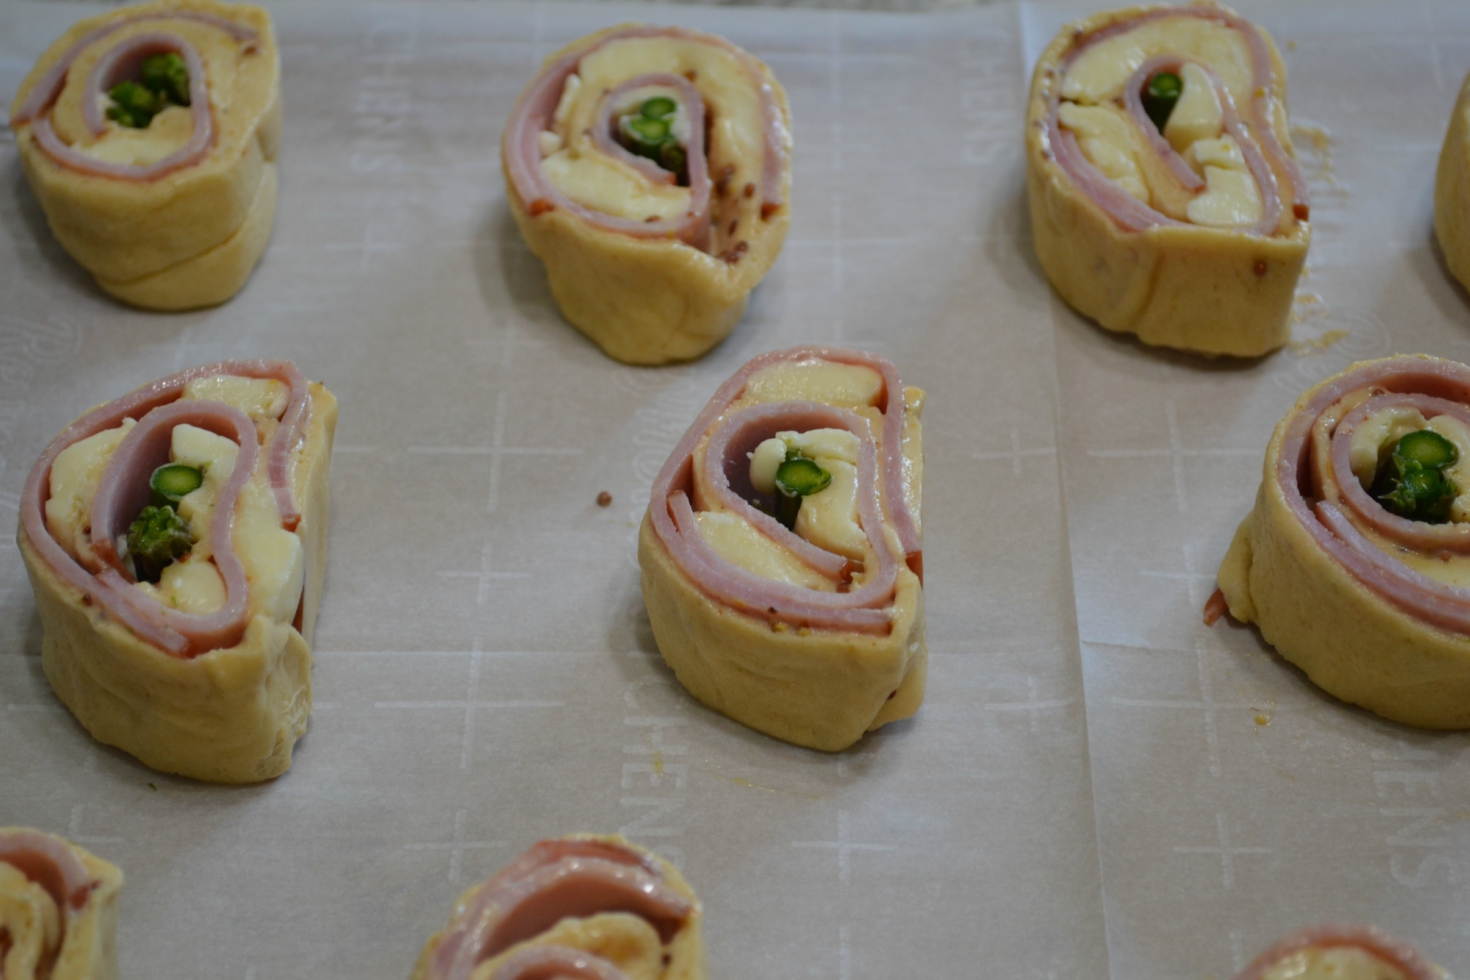 Ham-Brie-Asparagus Pinwheels are an easy appetizer with these ingredients baked in a crescent dough. They have a spread of honey mustard and warm, melted cheese.